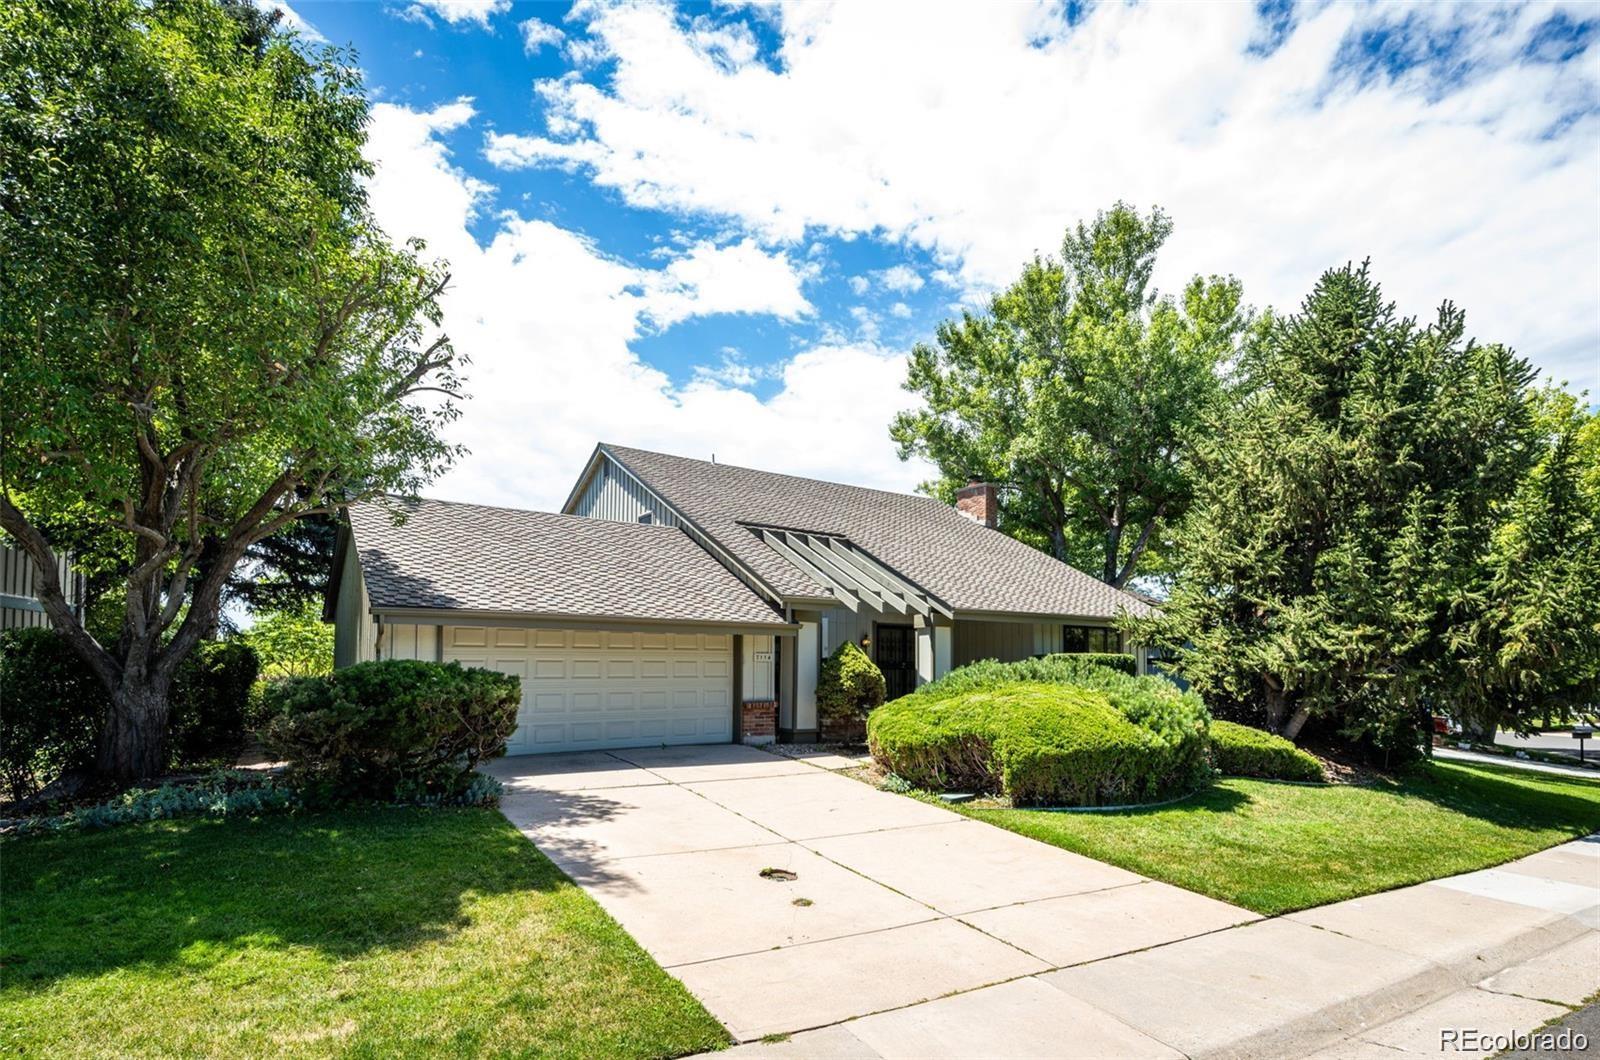 7114 s saint paul street, Centennial sold home. Closed on 2024-03-26 for $765,500.